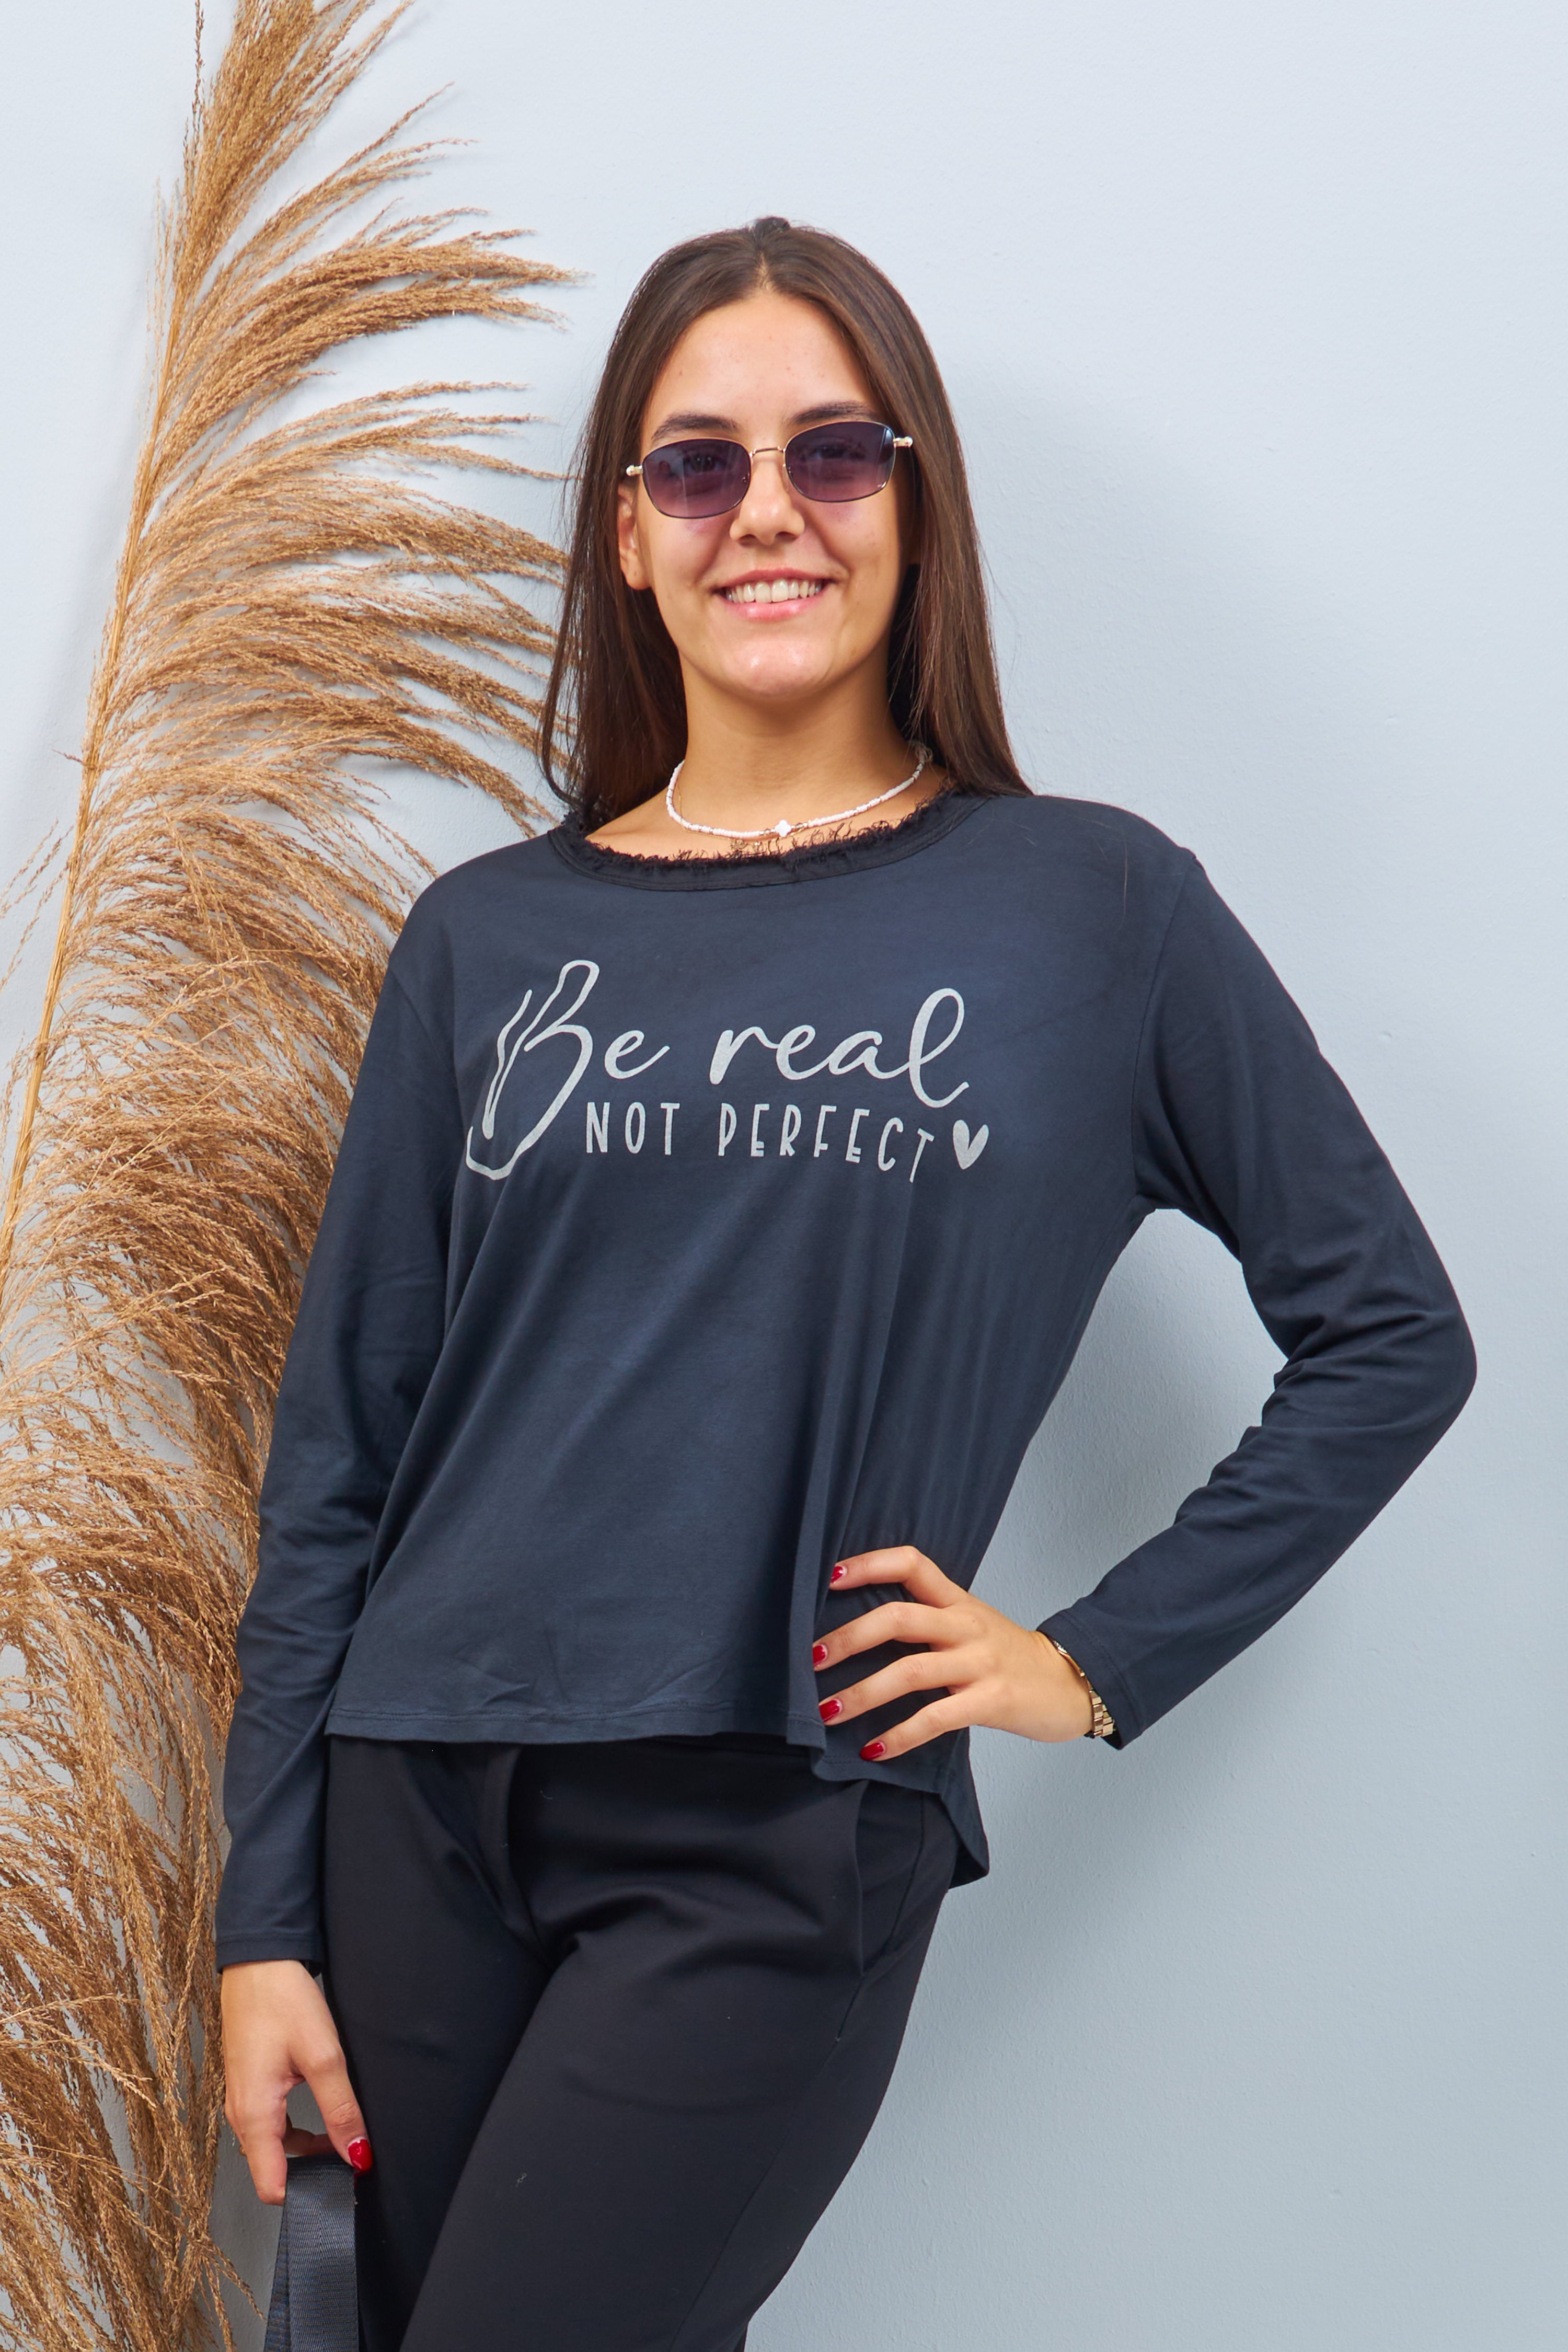 Shirt with the lettering “Be real NOT PERFECT”, black and beige